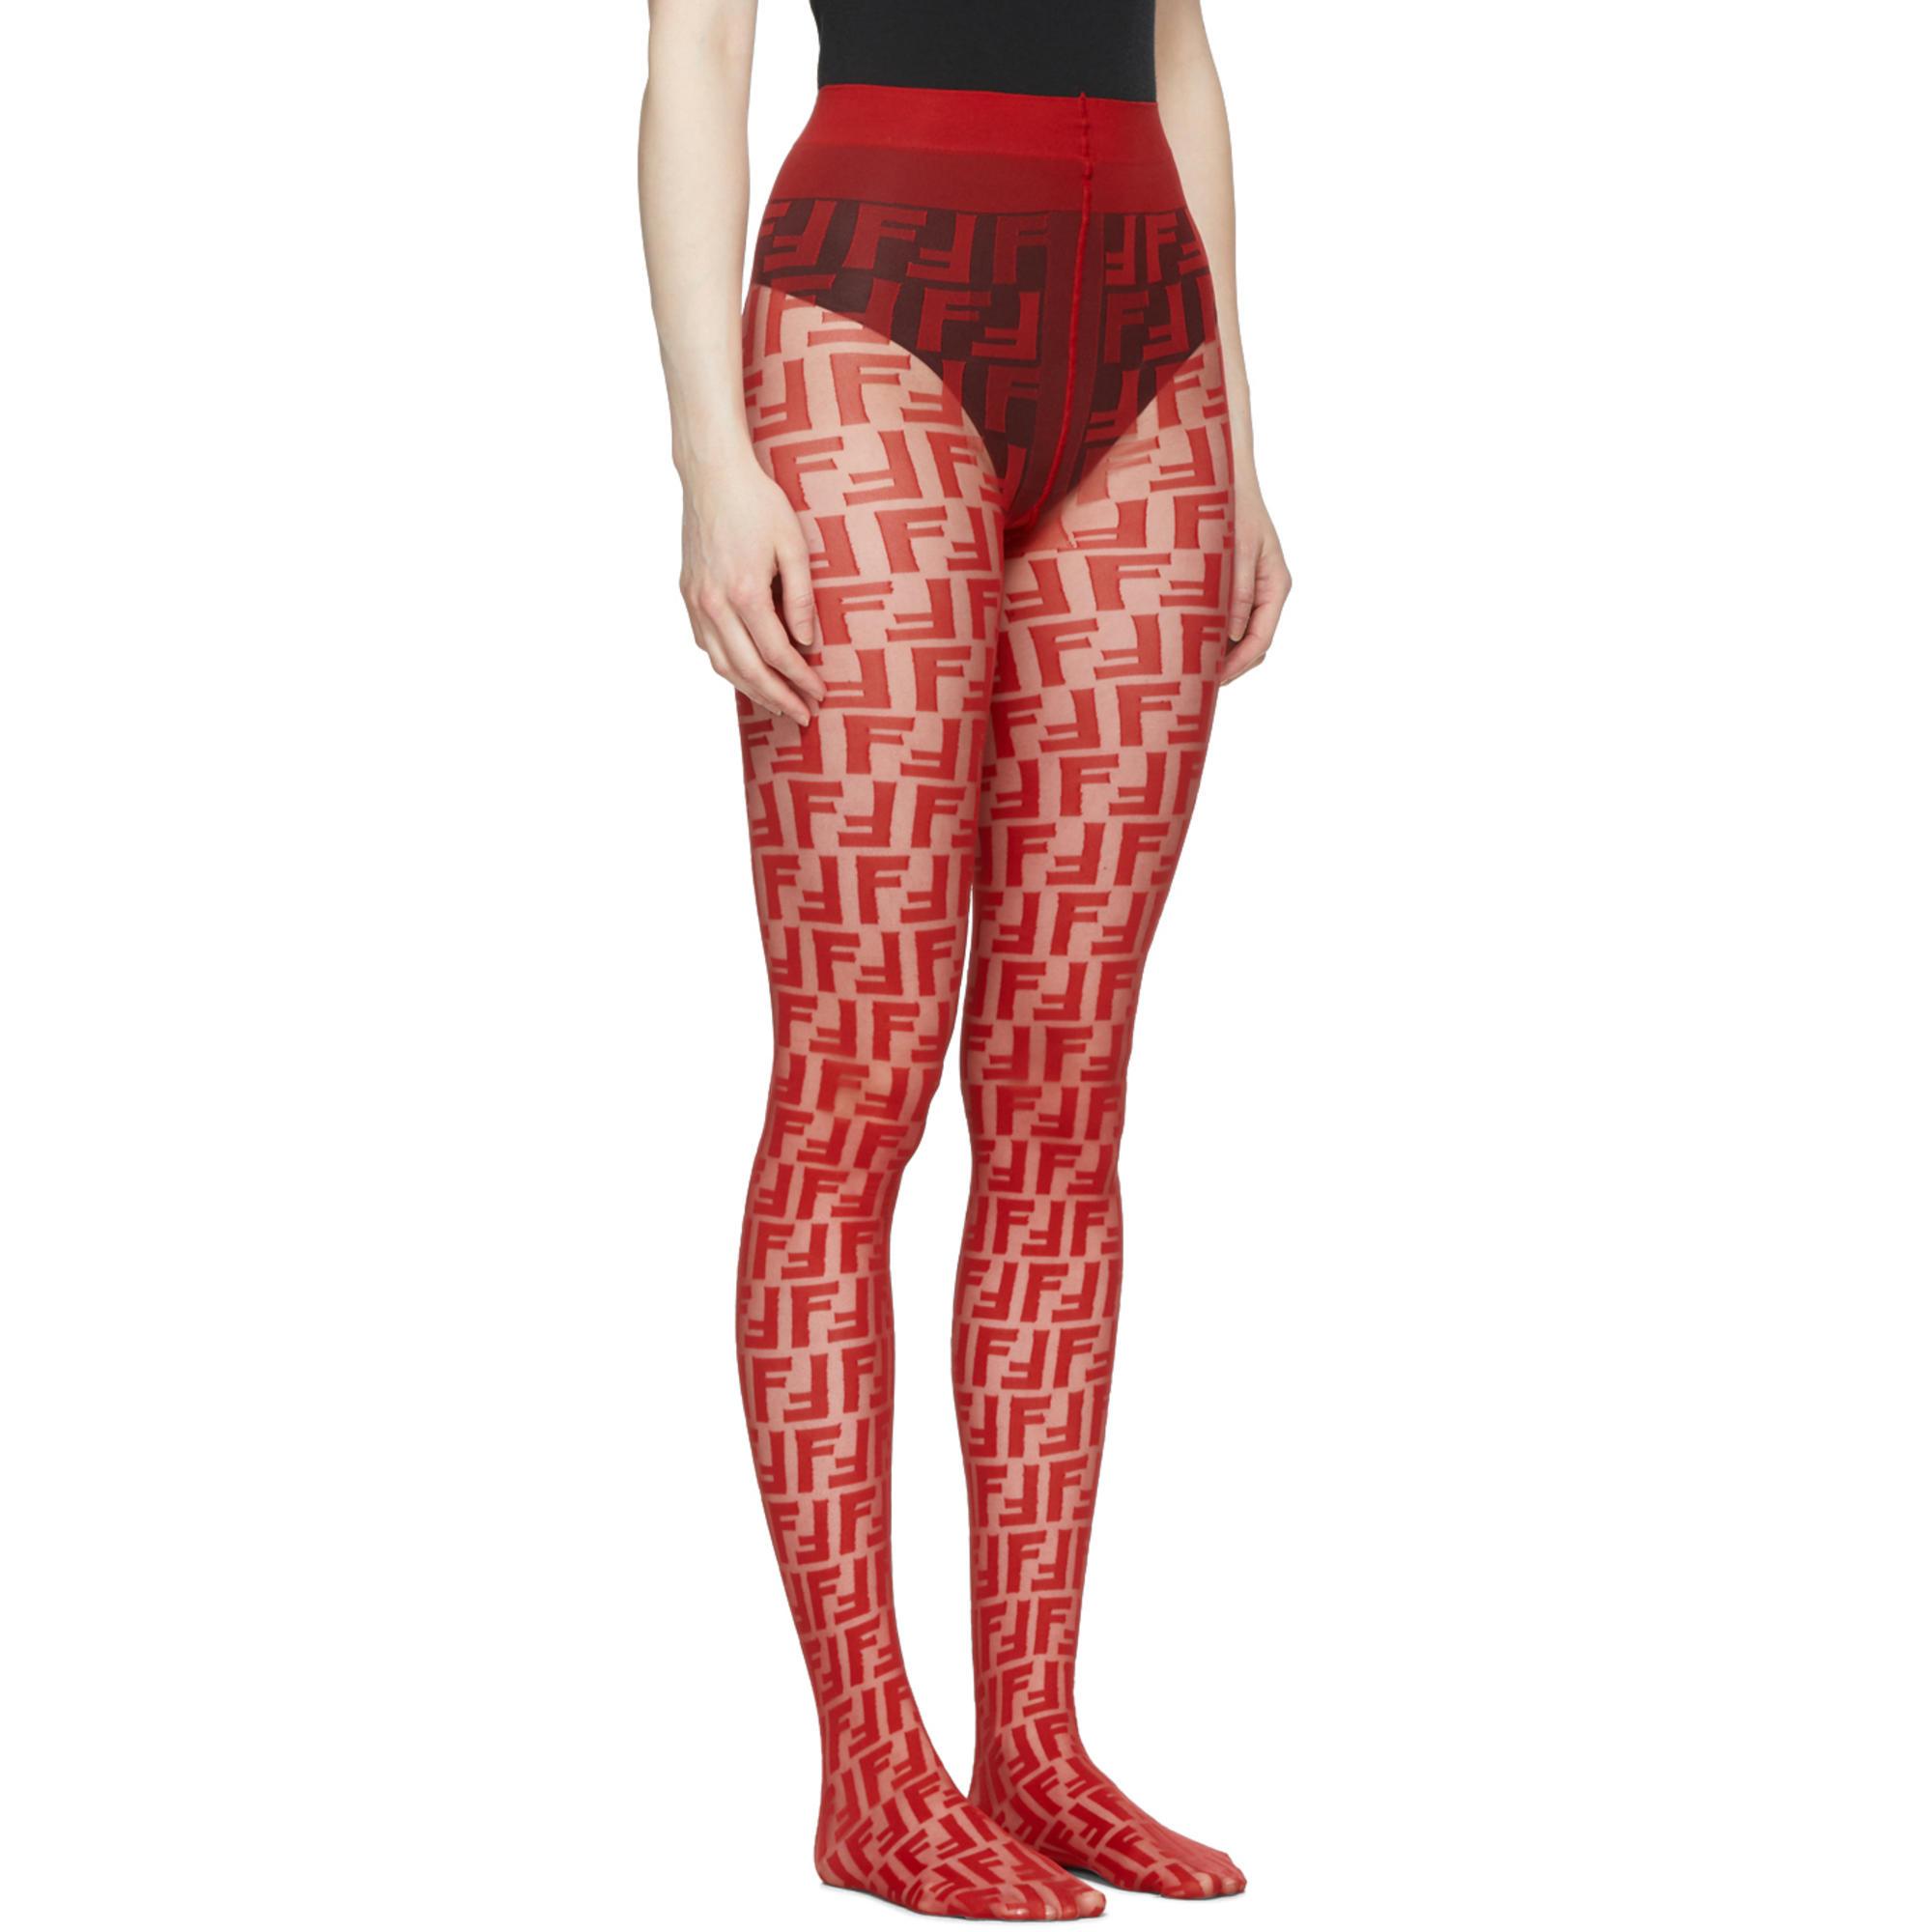 red fendi tights off 64% - online-sms.in